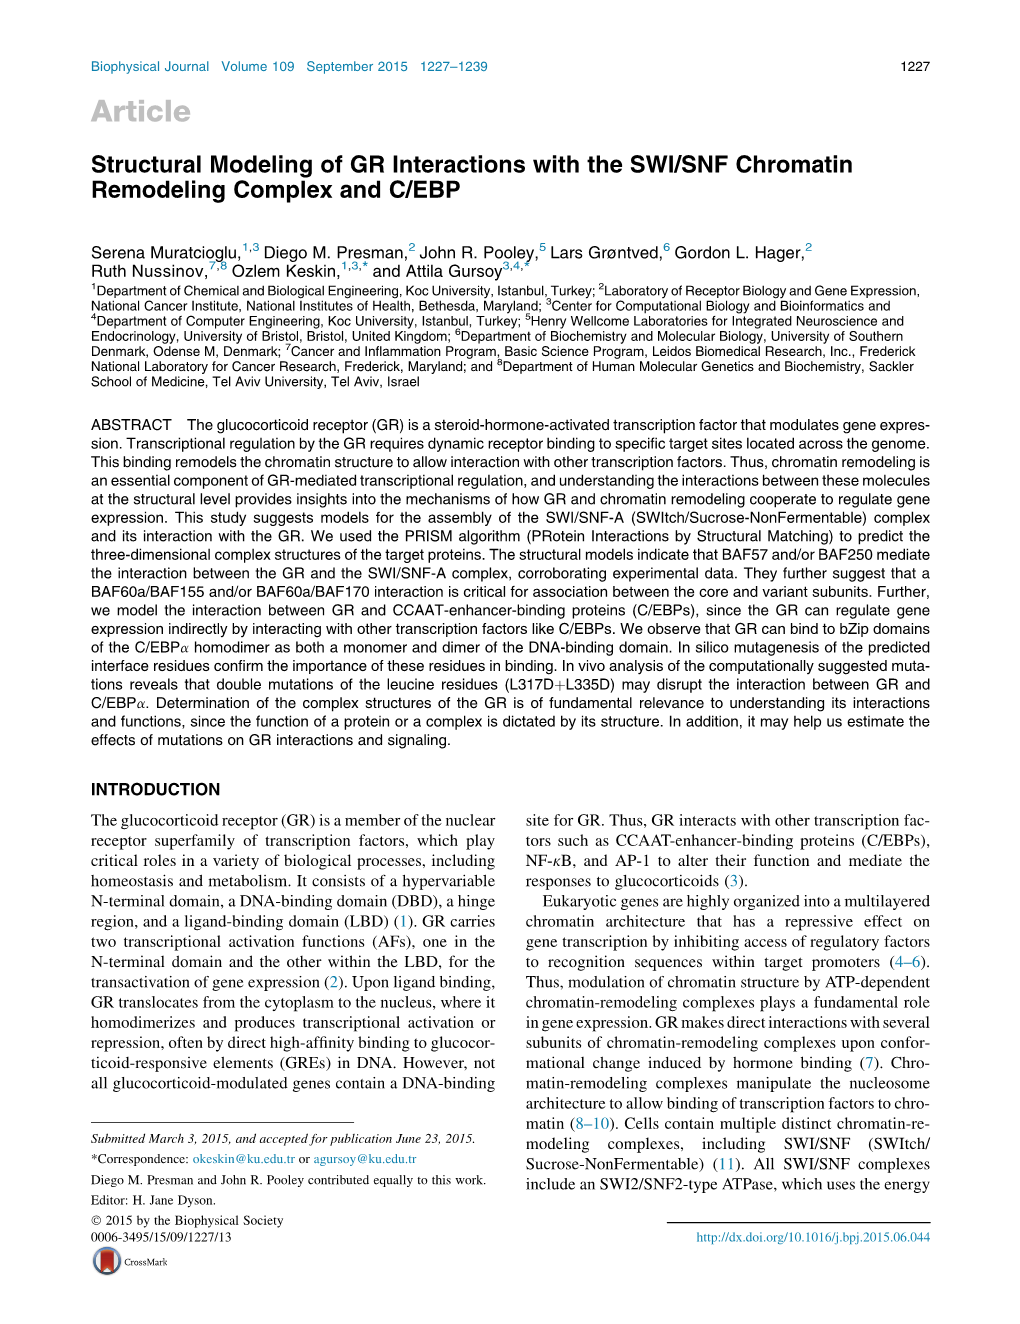 Structural Modeling of GR Interactions with the SWI/SNF Chromatin Remodeling Complex and C/EBP